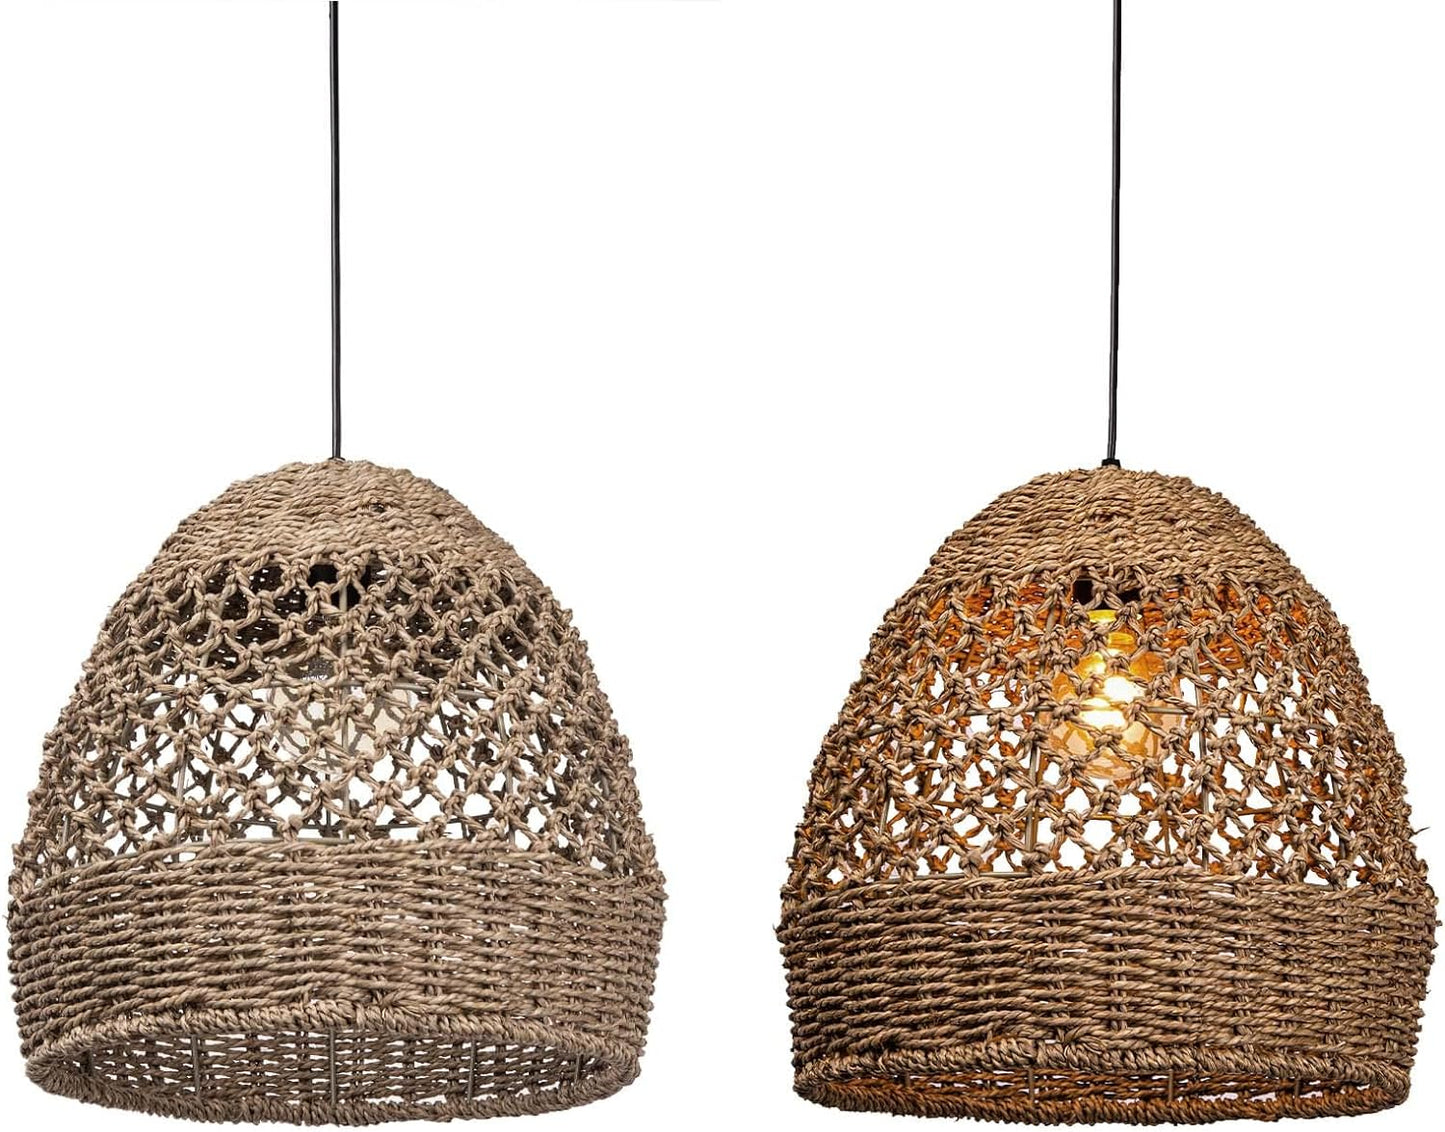 Arturesthome Retro Rattan Woven Pendant Light Fixture, Chandelier with Lamp Shade Light Cover, Hanging Lighting for Kitchen Dining Room Foyer Entry